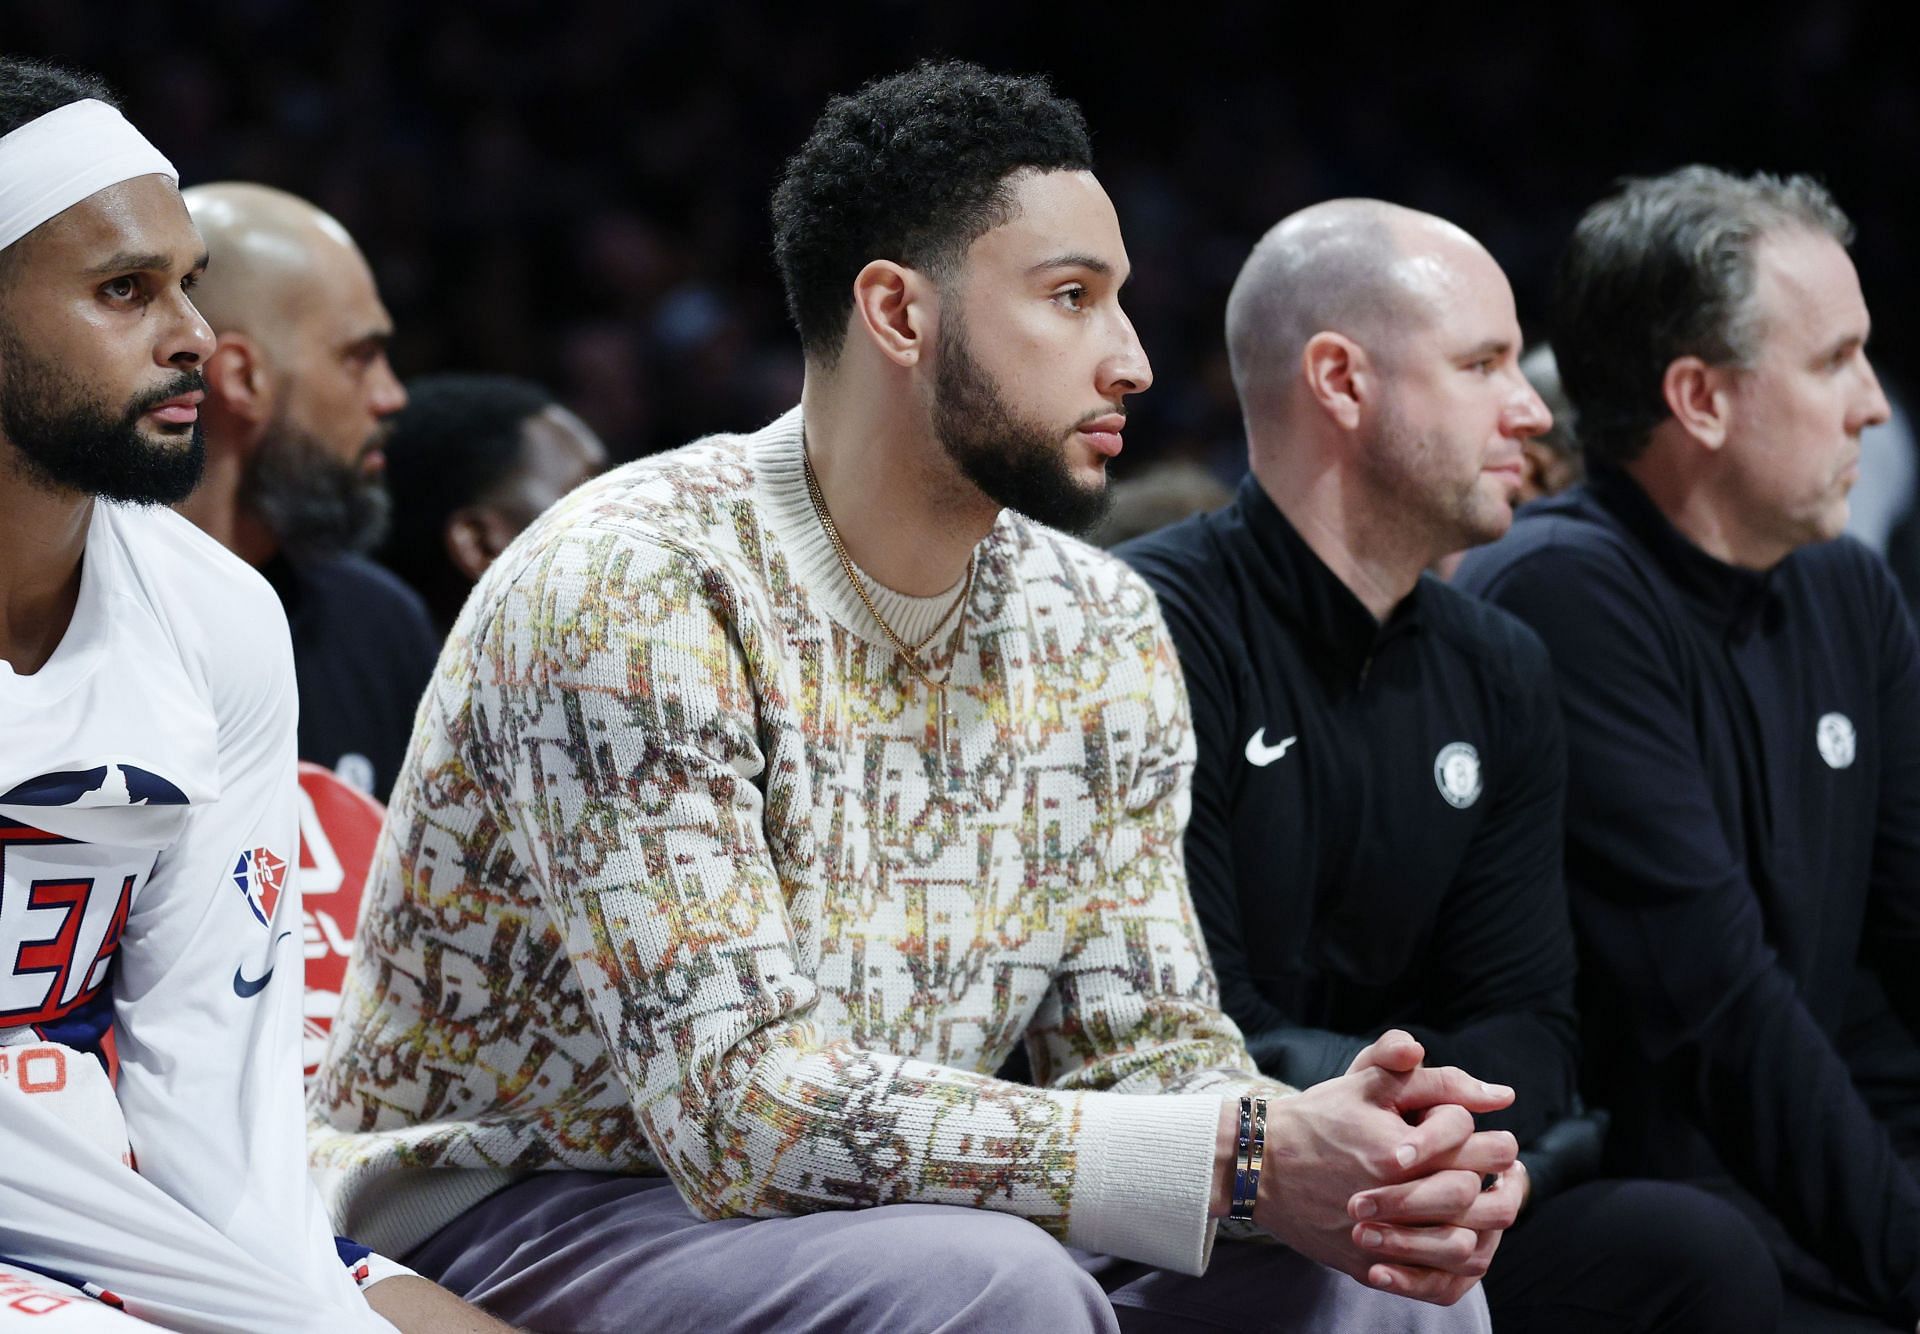 Ben Simmons #10 of the Brooklyn Nets looks on from the bench during the first half against the Portland Trail Blazers at Barclays Center on March 18, 2022 in the Brooklyn borough of New York City.